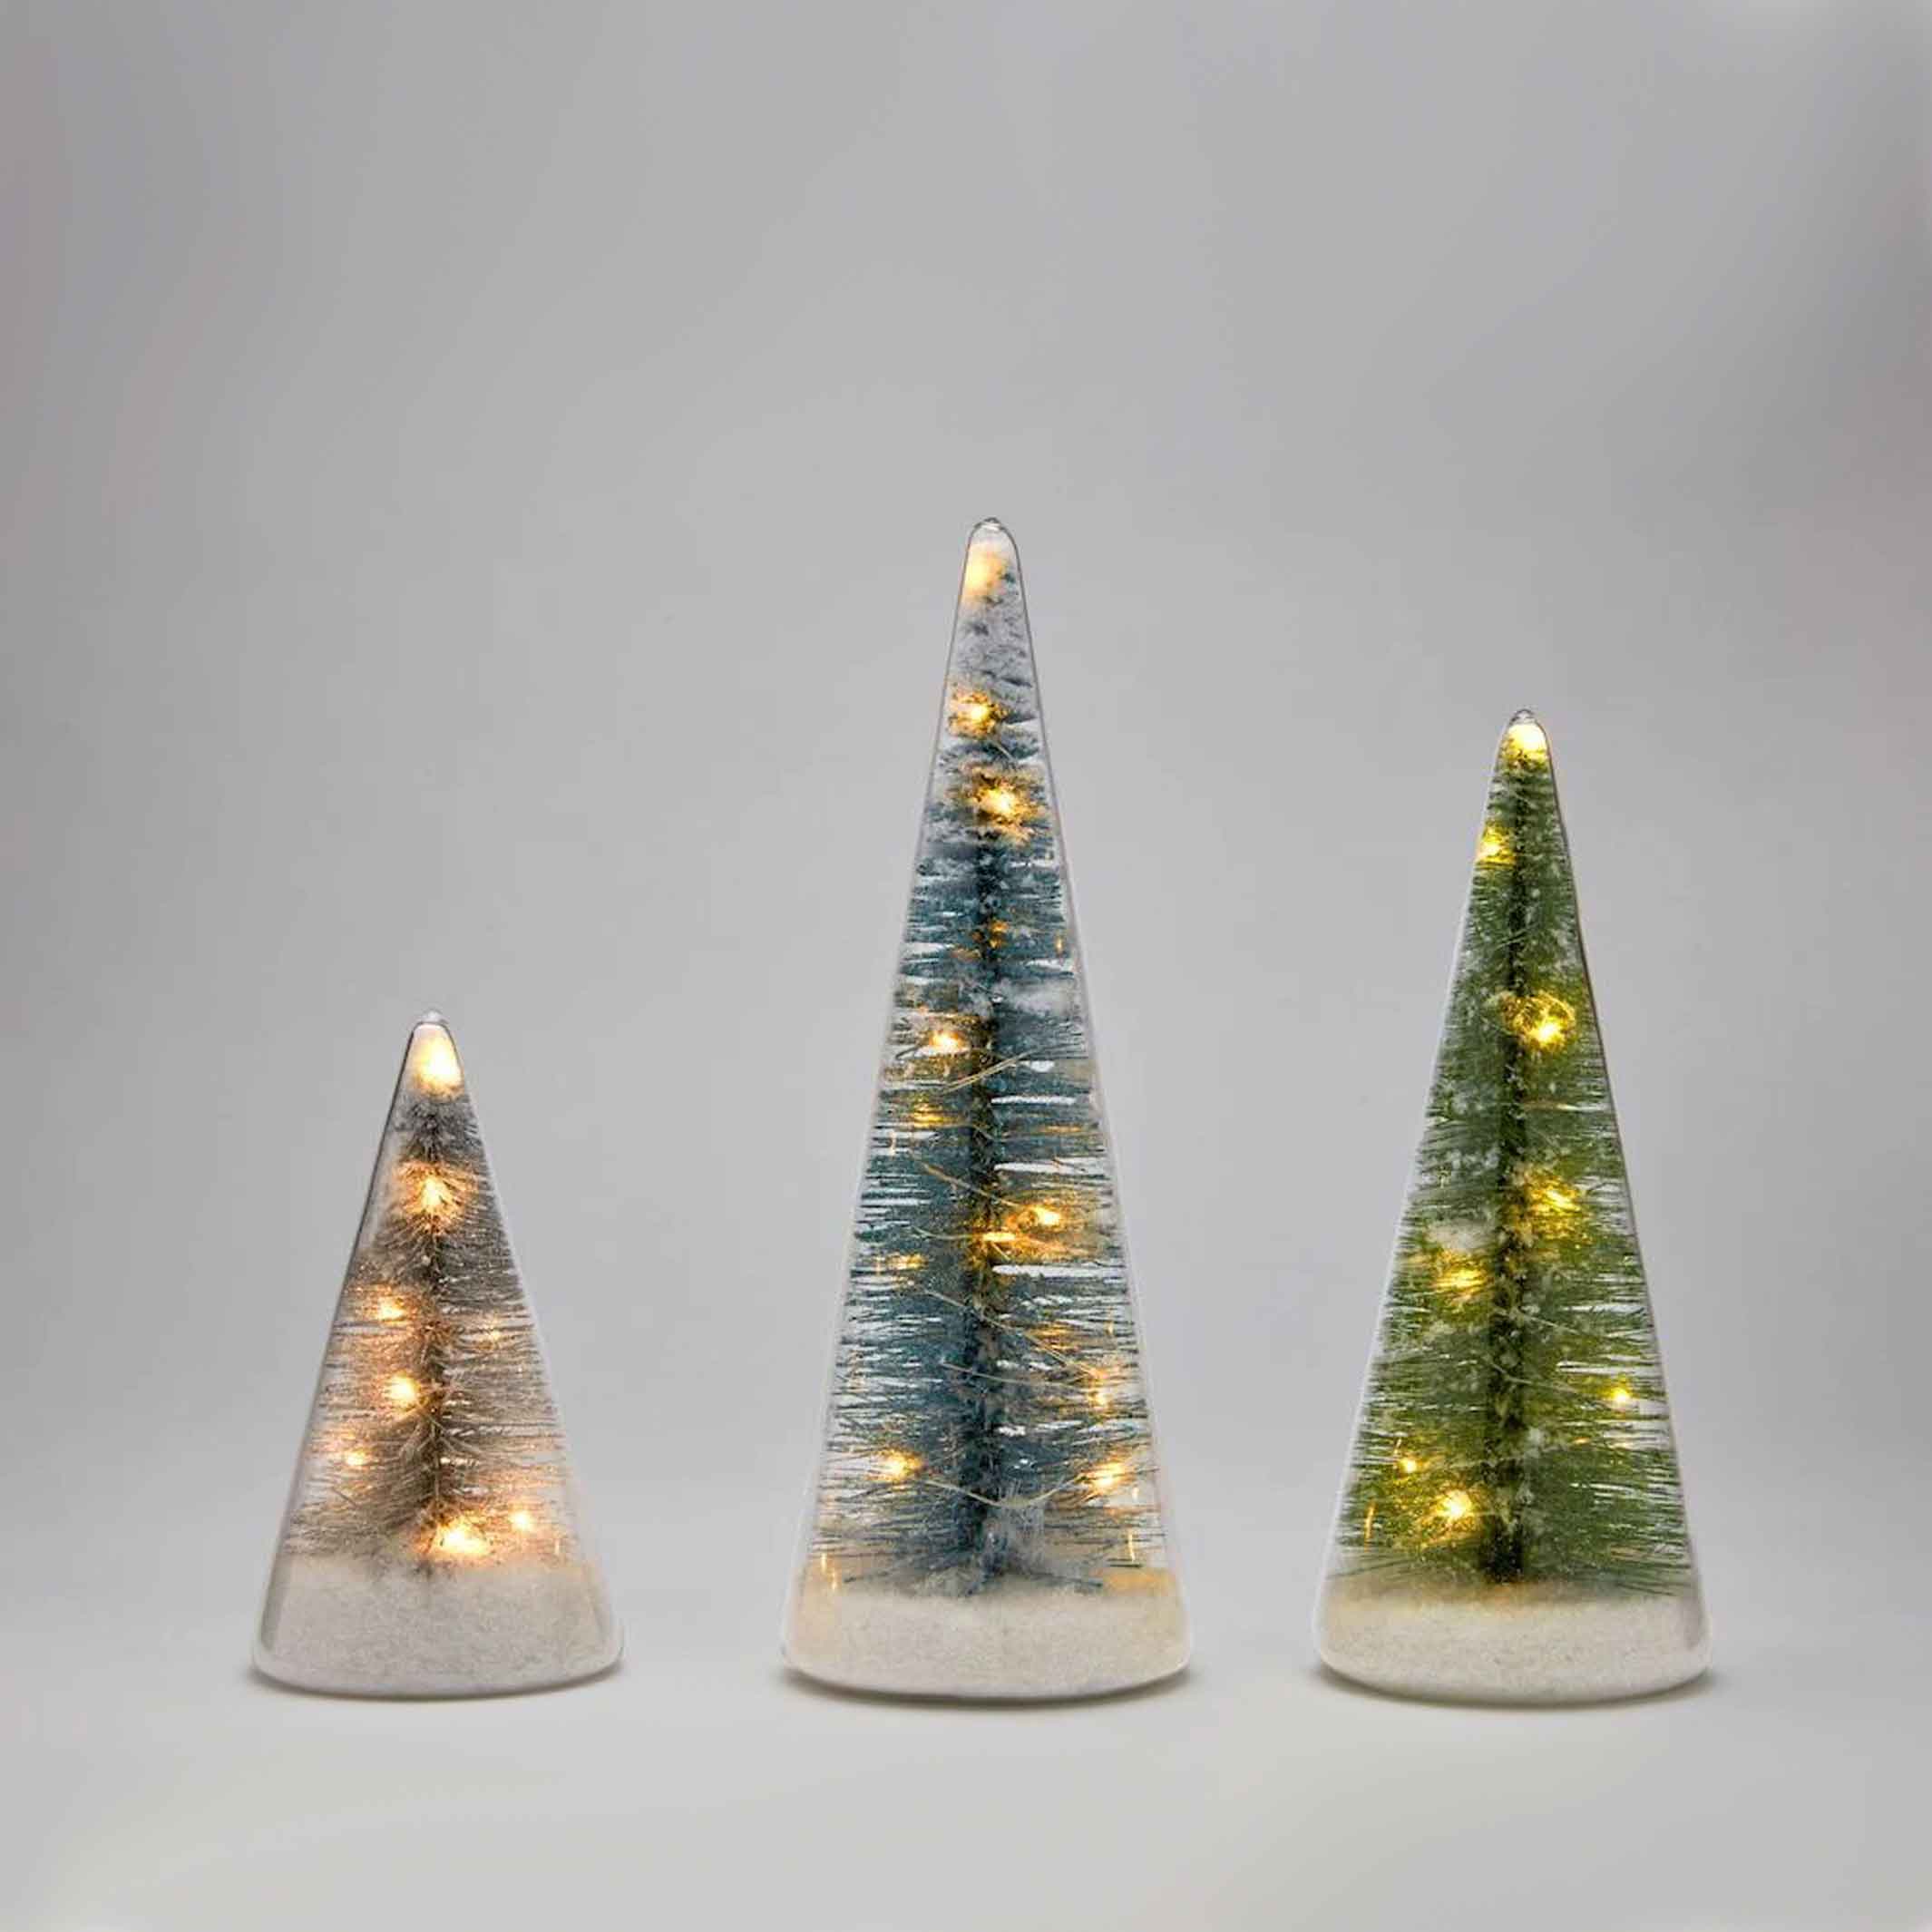 WINTER SPRUCE | LED Glass Lighted TREEES | Set of 3 | MoMA